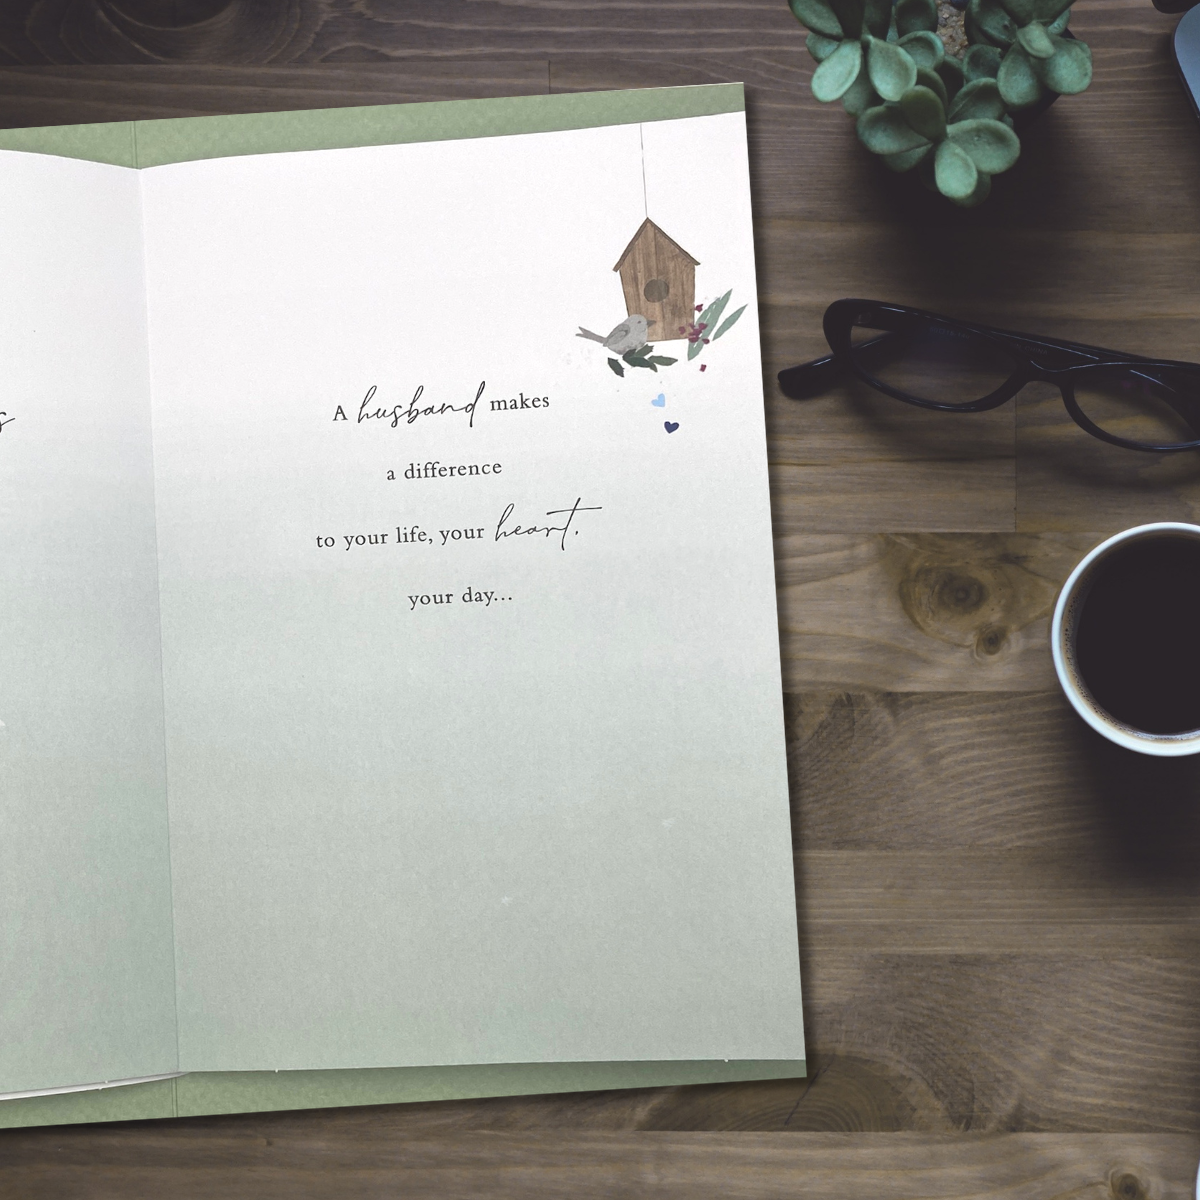 Sage and white colour card with gold foil text and gardening illustrations with heartfelt words